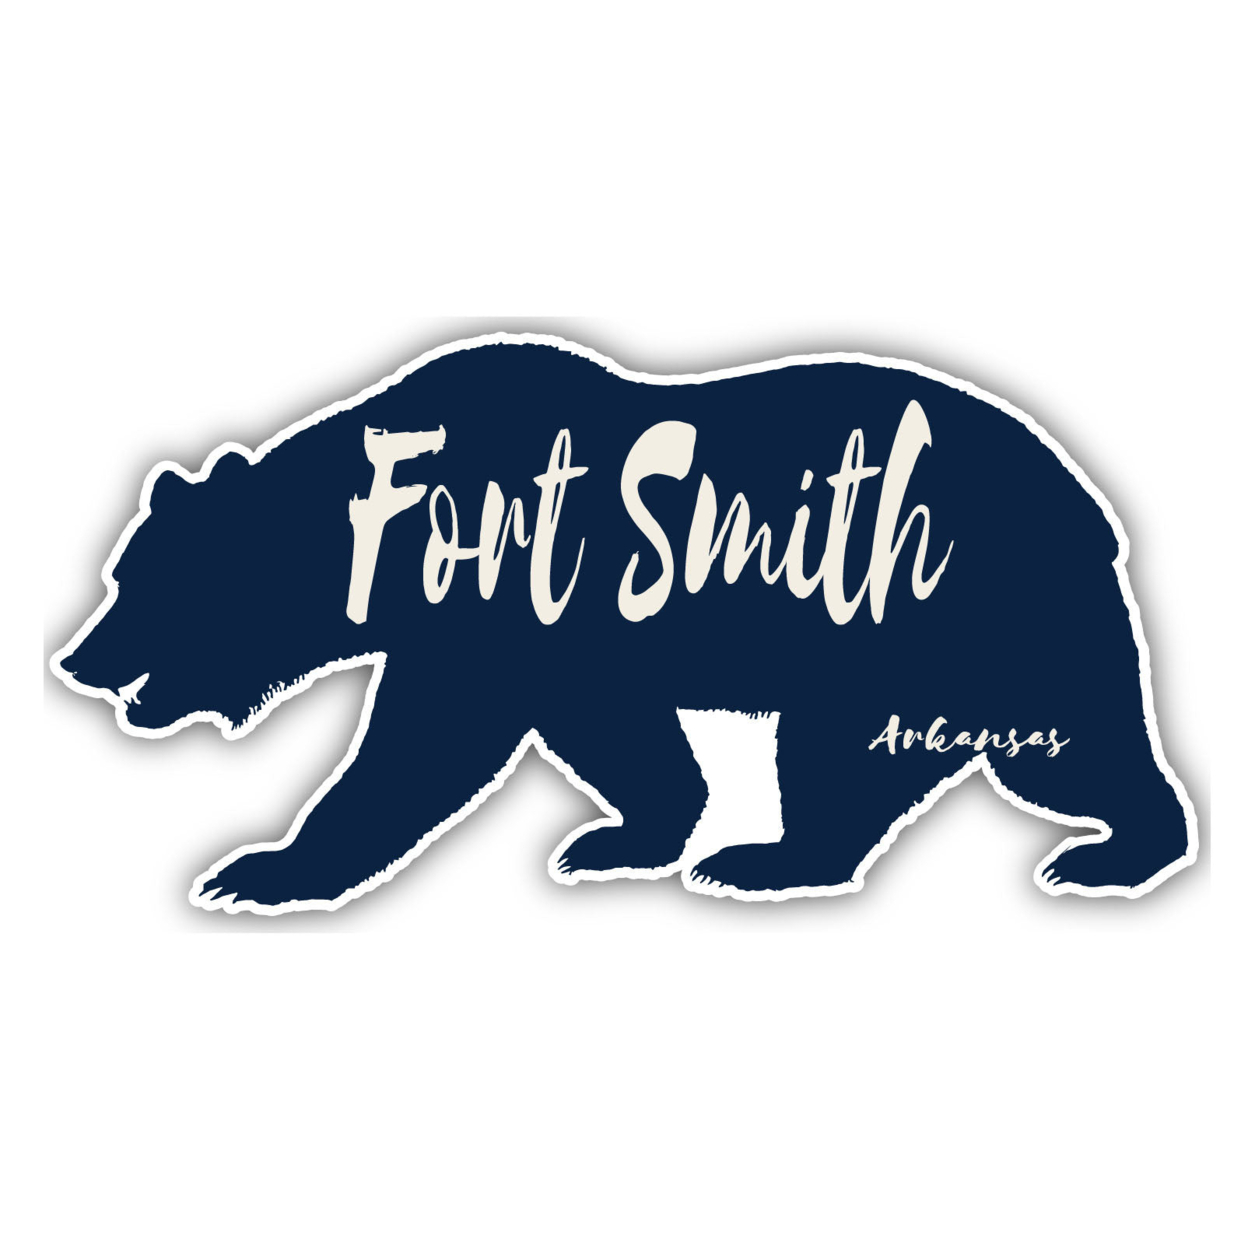 Fort Smith Arkansas Souvenir Decorative Stickers (Choose Theme And Size) - 4-Pack, 6-Inch, Bear